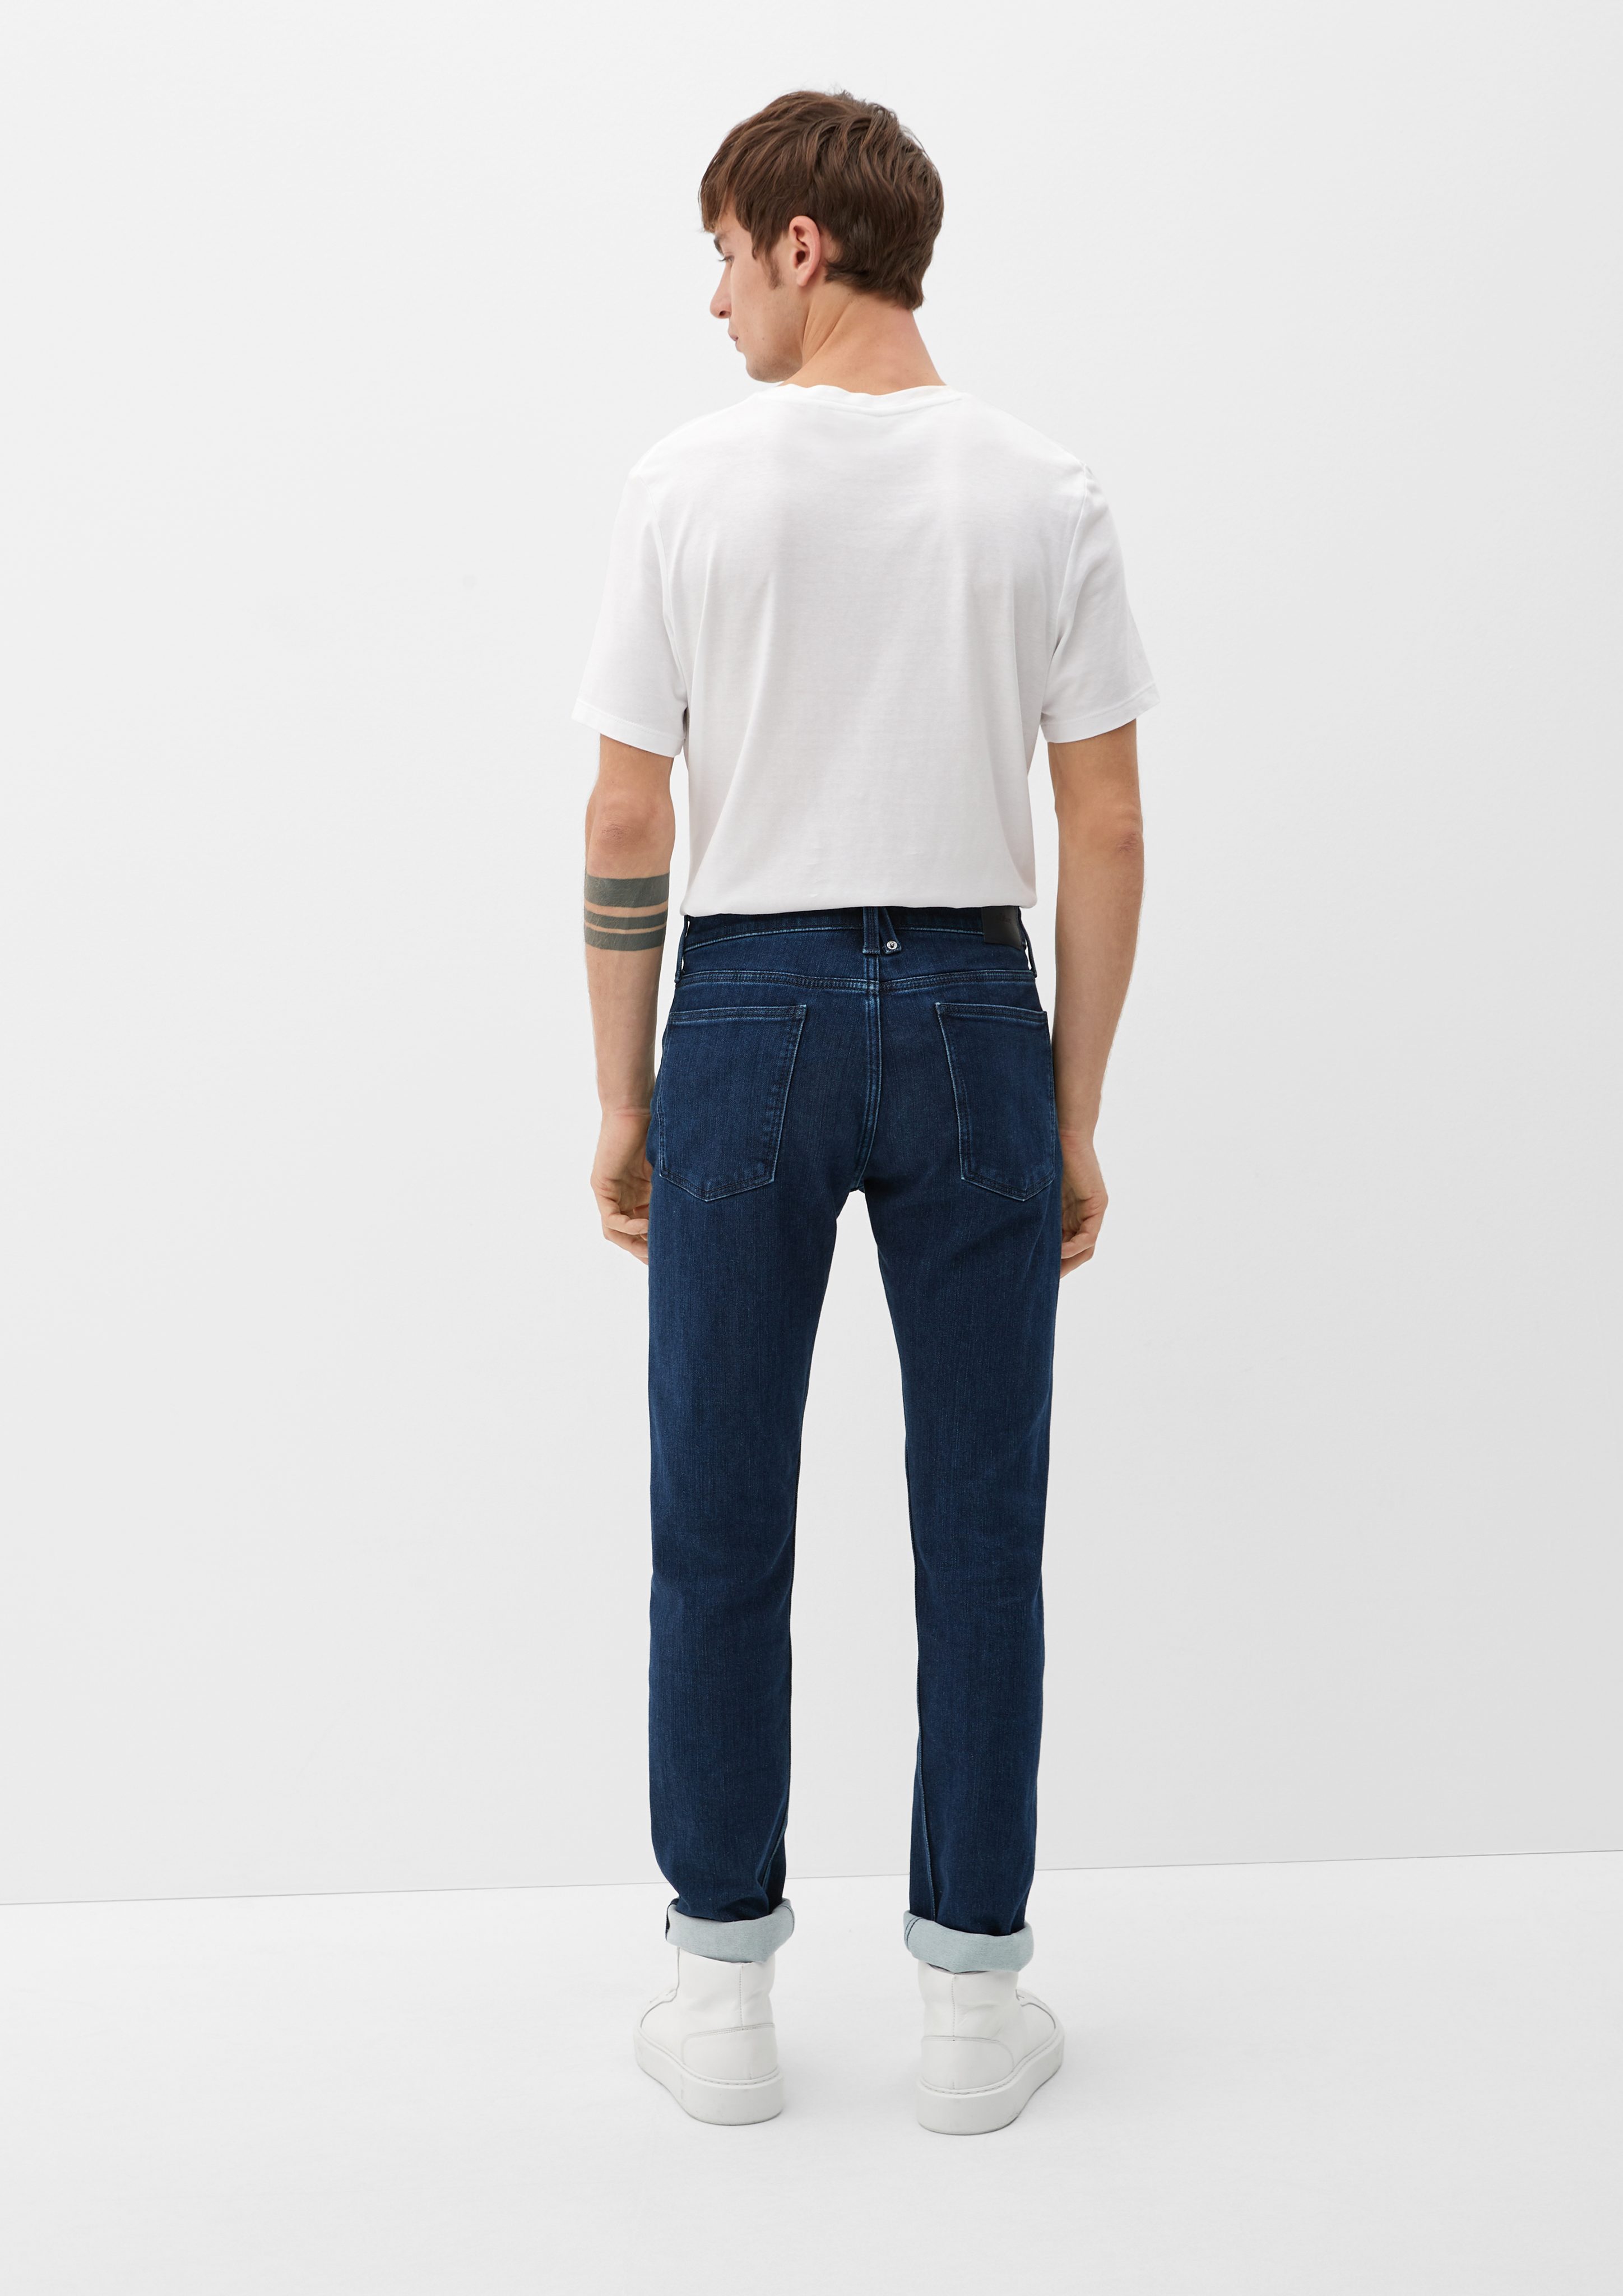 Slim Jeans Fit Stoffhose Rise / Leg s.Oliver Carson Waschung / / Tapered Mid